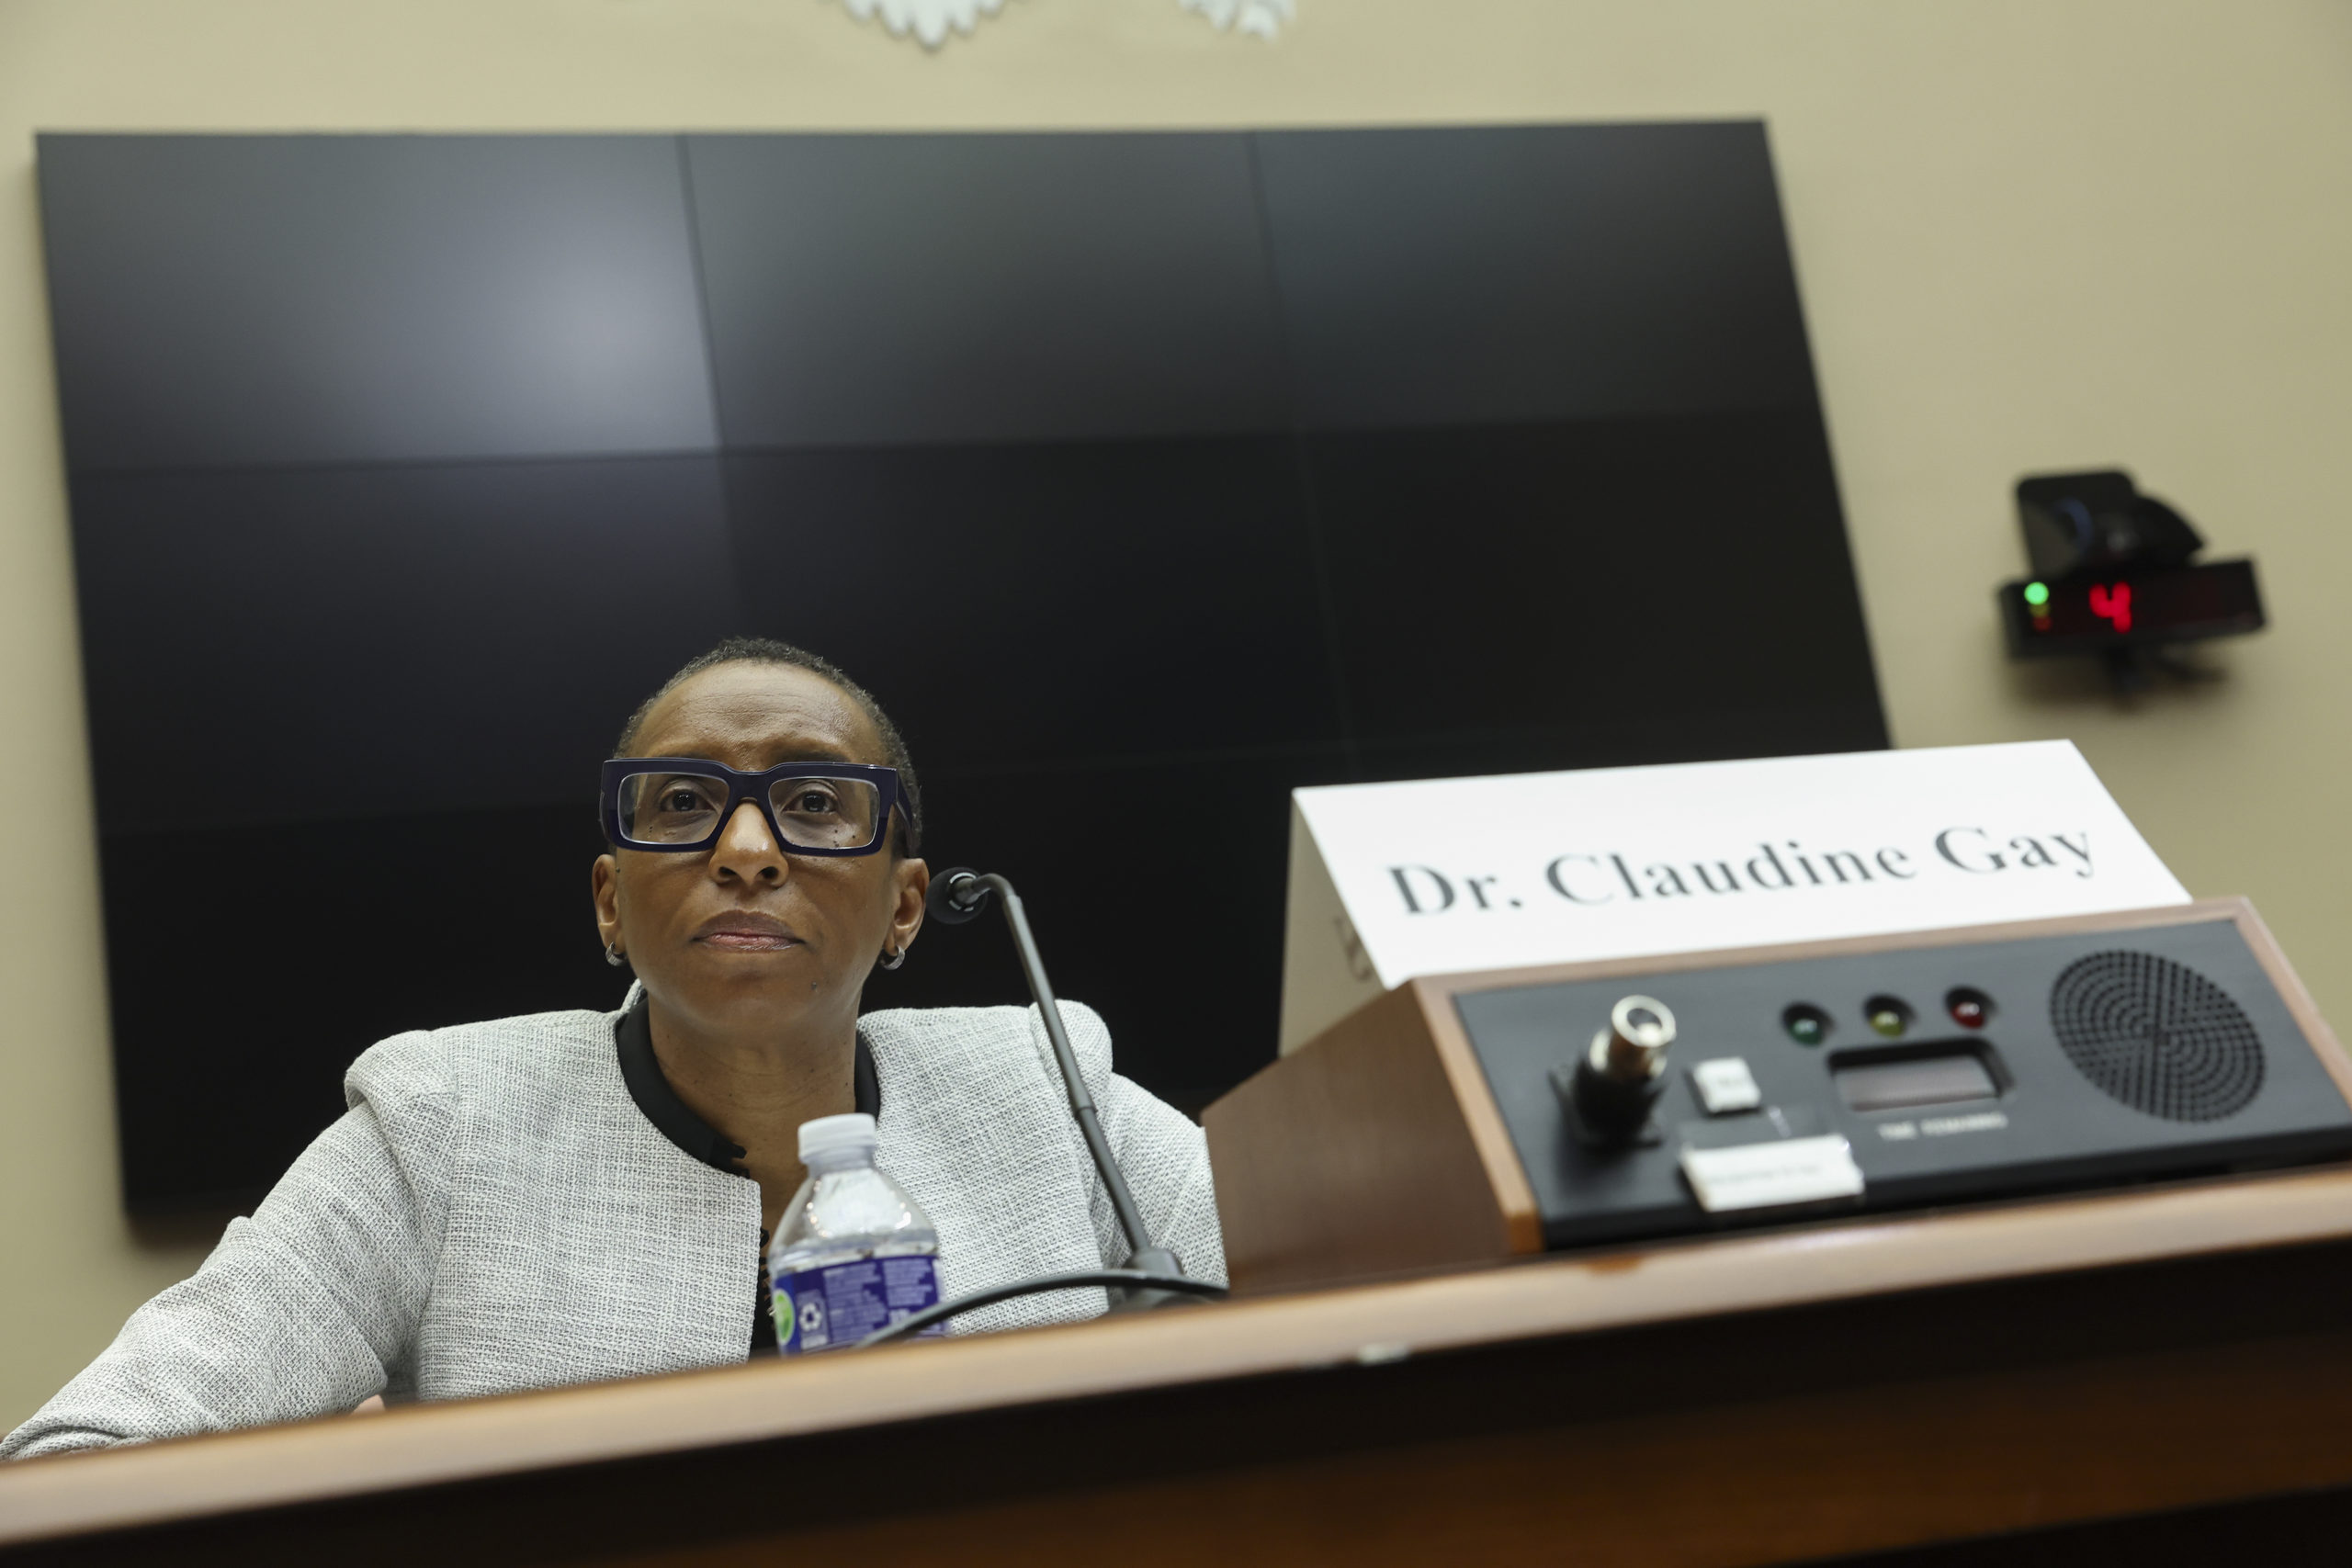 WASHINGTON, DC - DECEMBER 05: Dr. Claudine Gay, President of Harvard University, testifies before the House Education and Workforce Committee at the Rayburn House Office Building on December 05, 2023 in Washington, DC. The Committee held a hearing to investigate antisemitism on college campuses. (Photo by Kevin Dietsch/Getty Images)